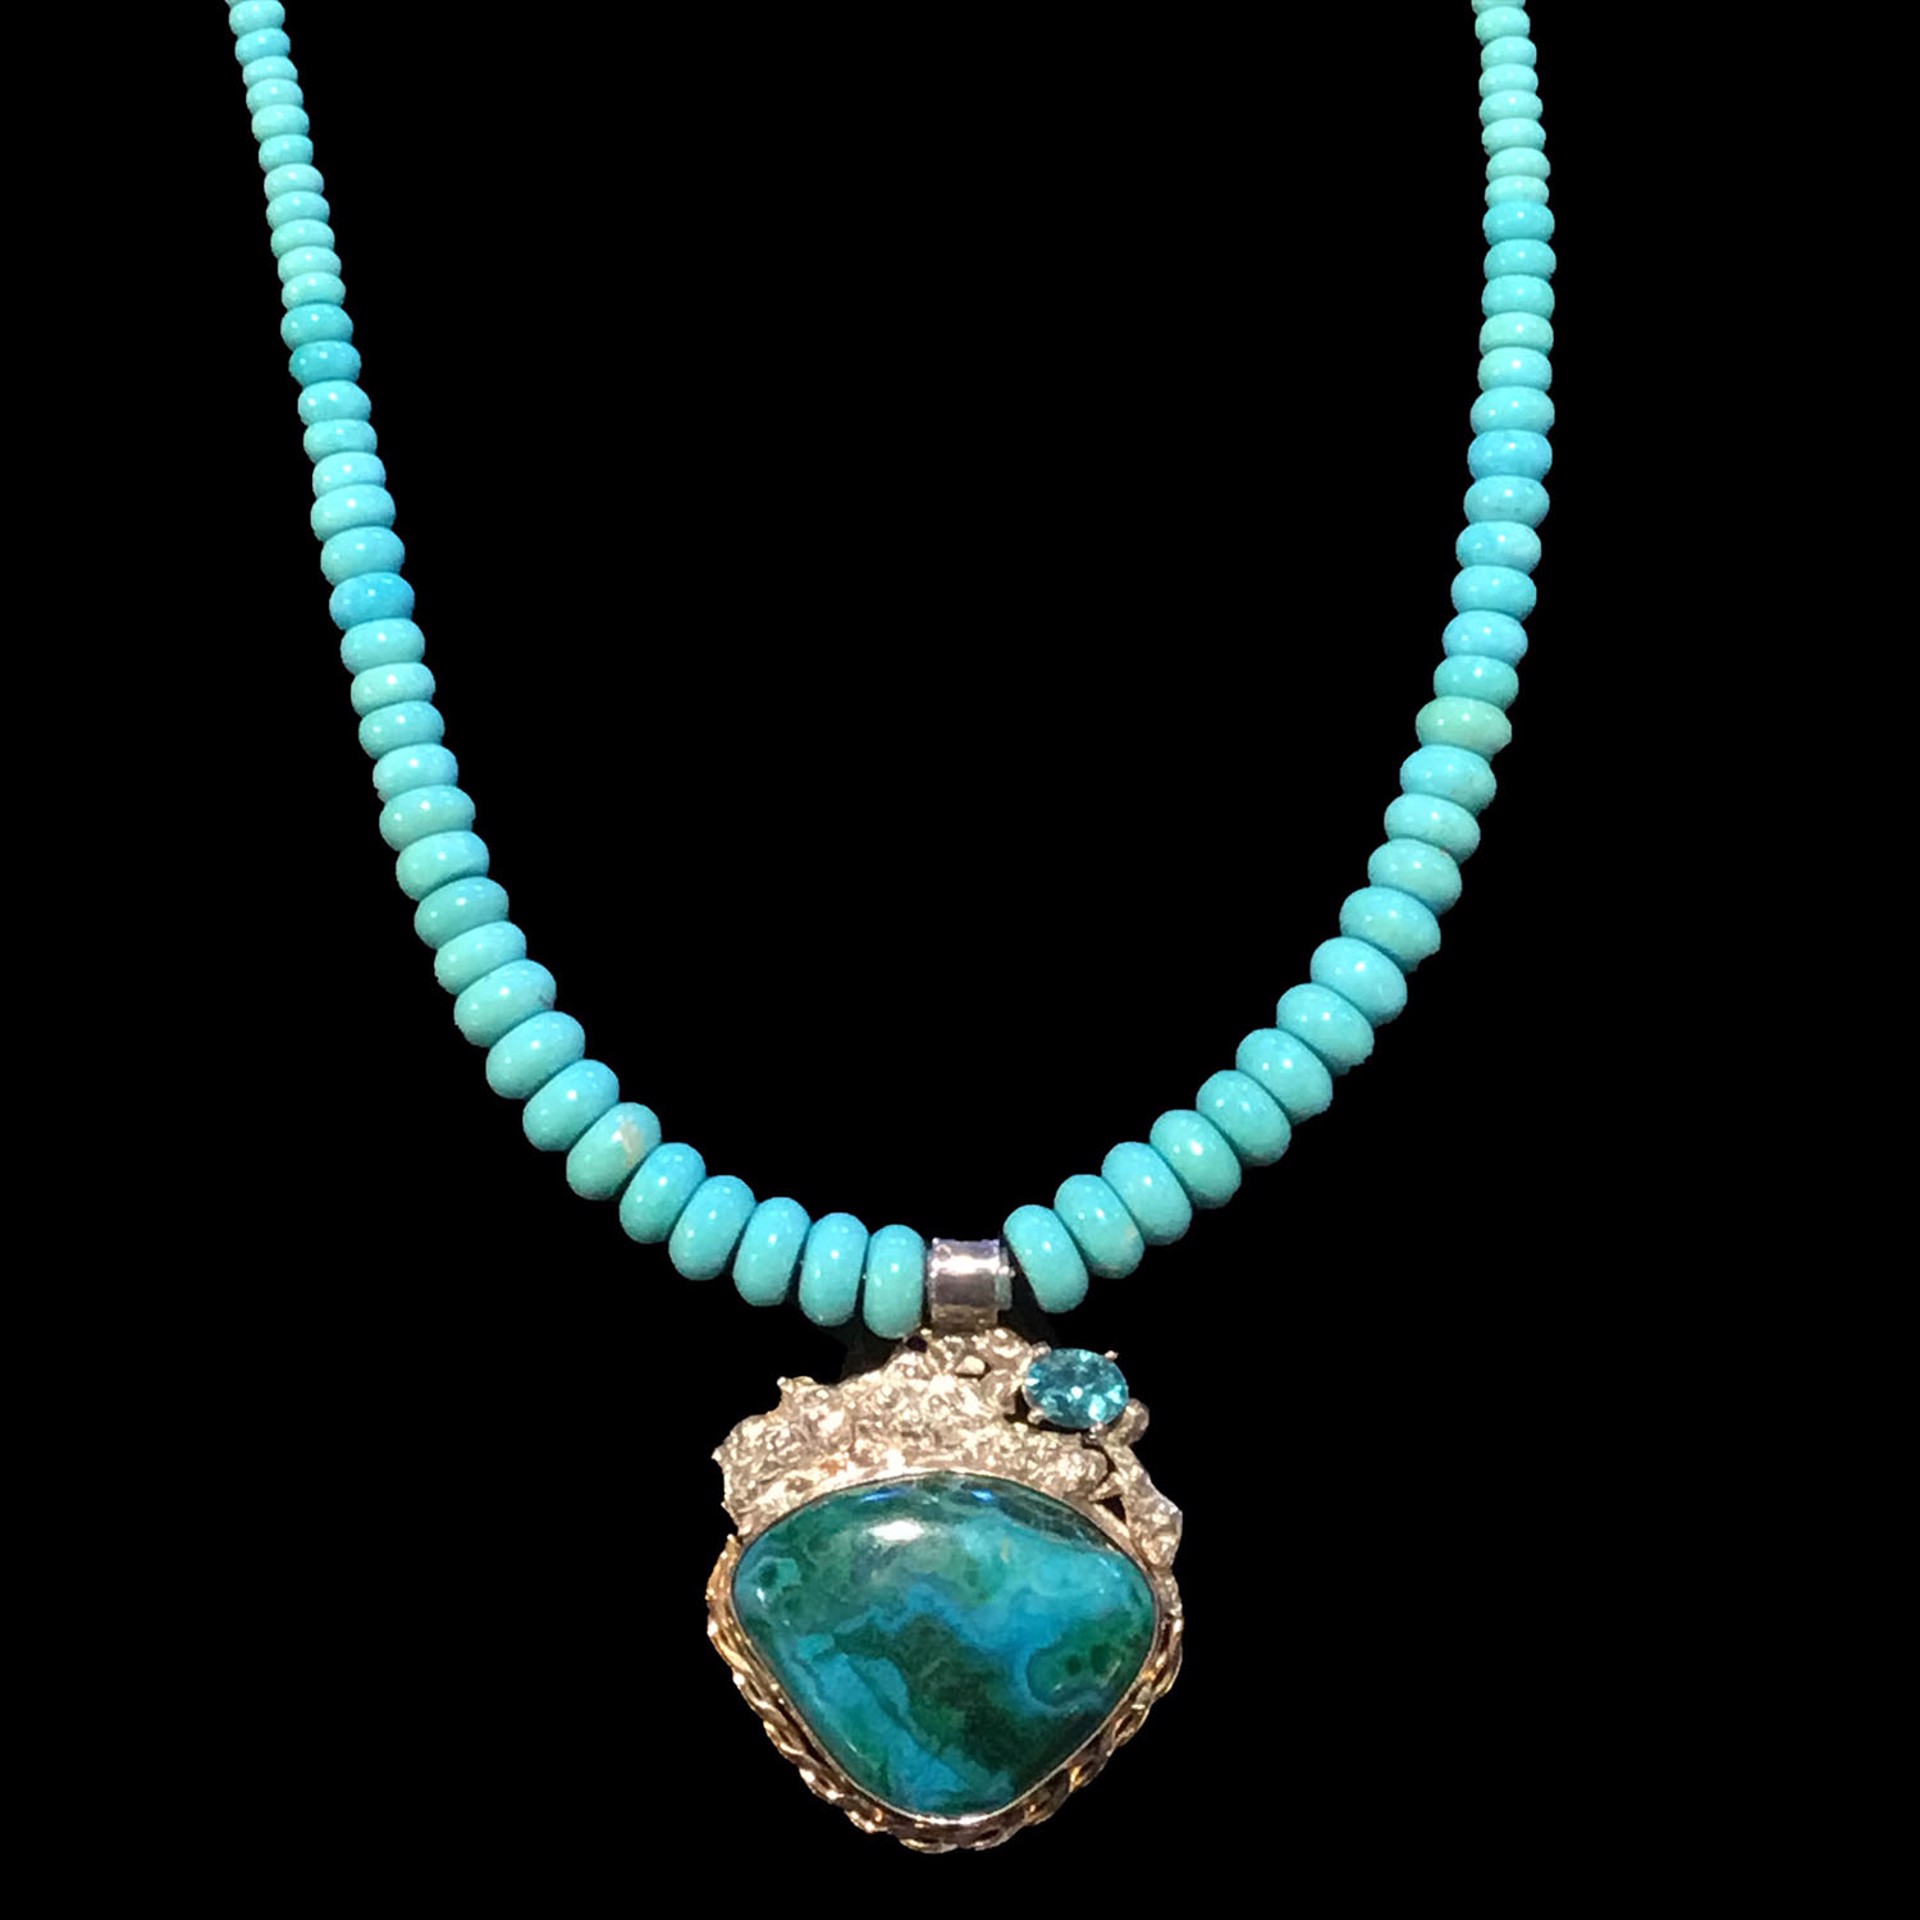 Chrysoprase, Apatite & Turquoise Necklace by Michael Redhawk